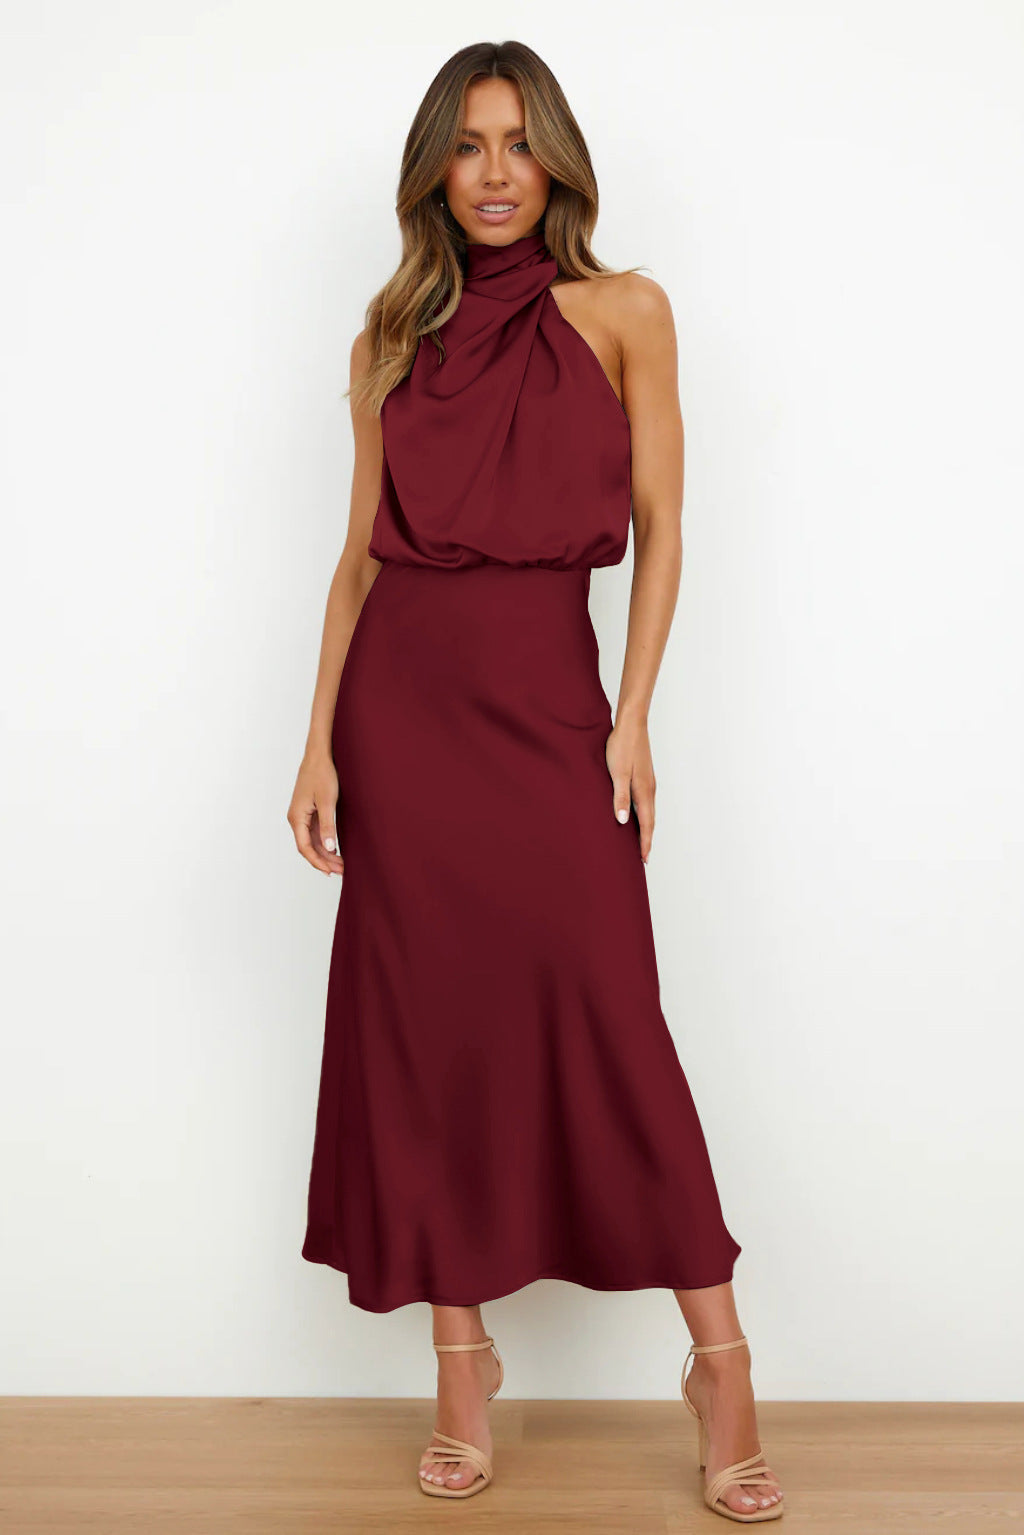 Sexy Halter Women Evening Party Dresses-Dresses-Wine Red-S-Free Shipping at meselling99